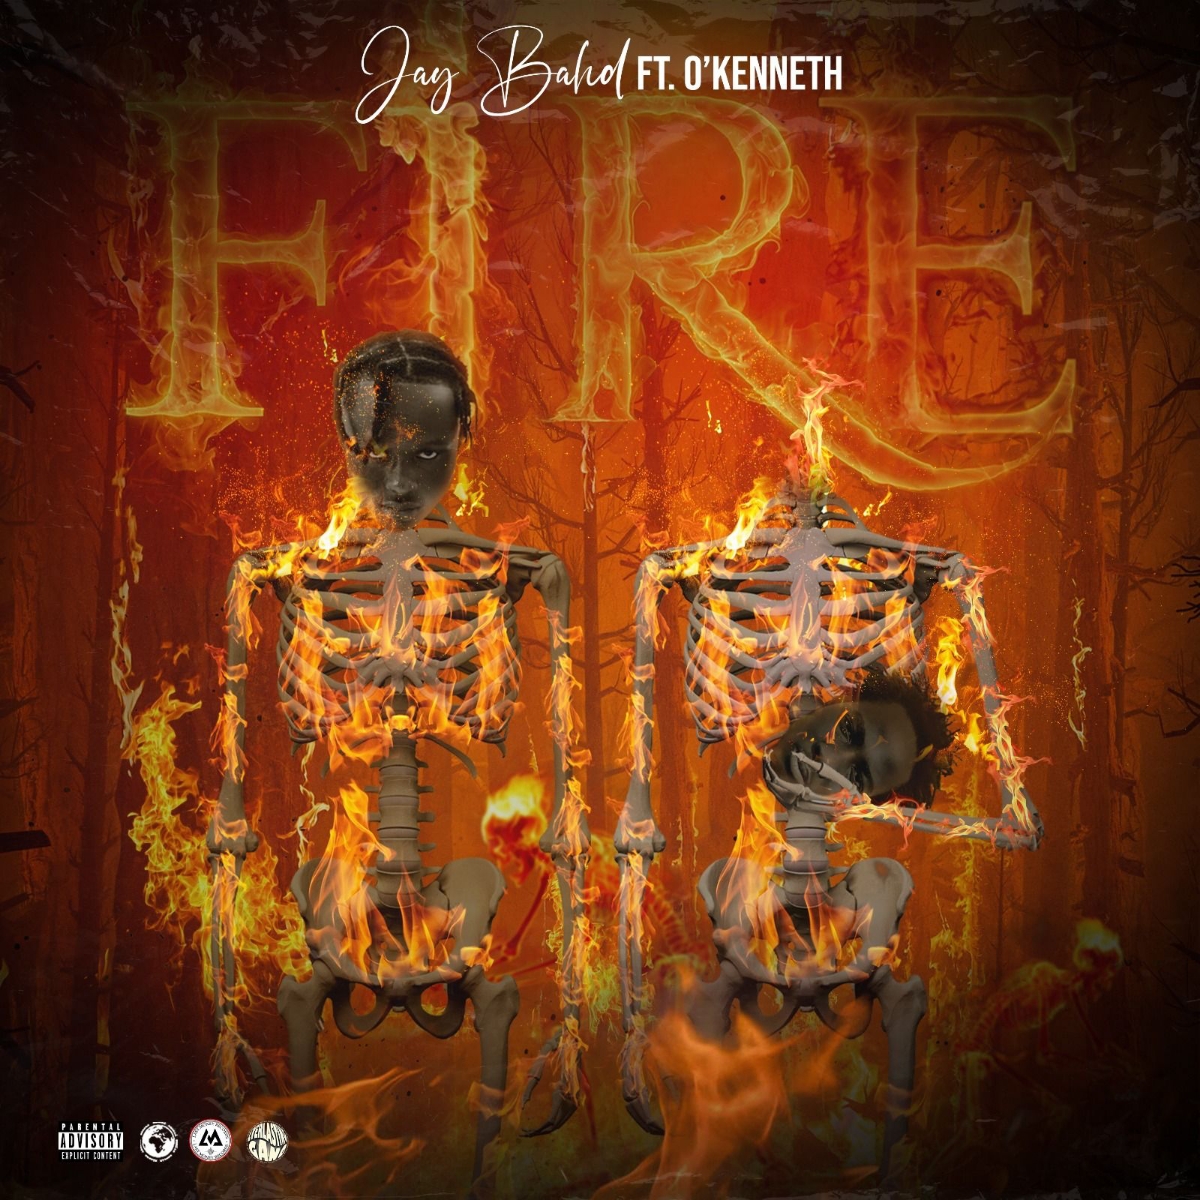 Jay Bahd – Fire ft O'Kenneth mp3 download